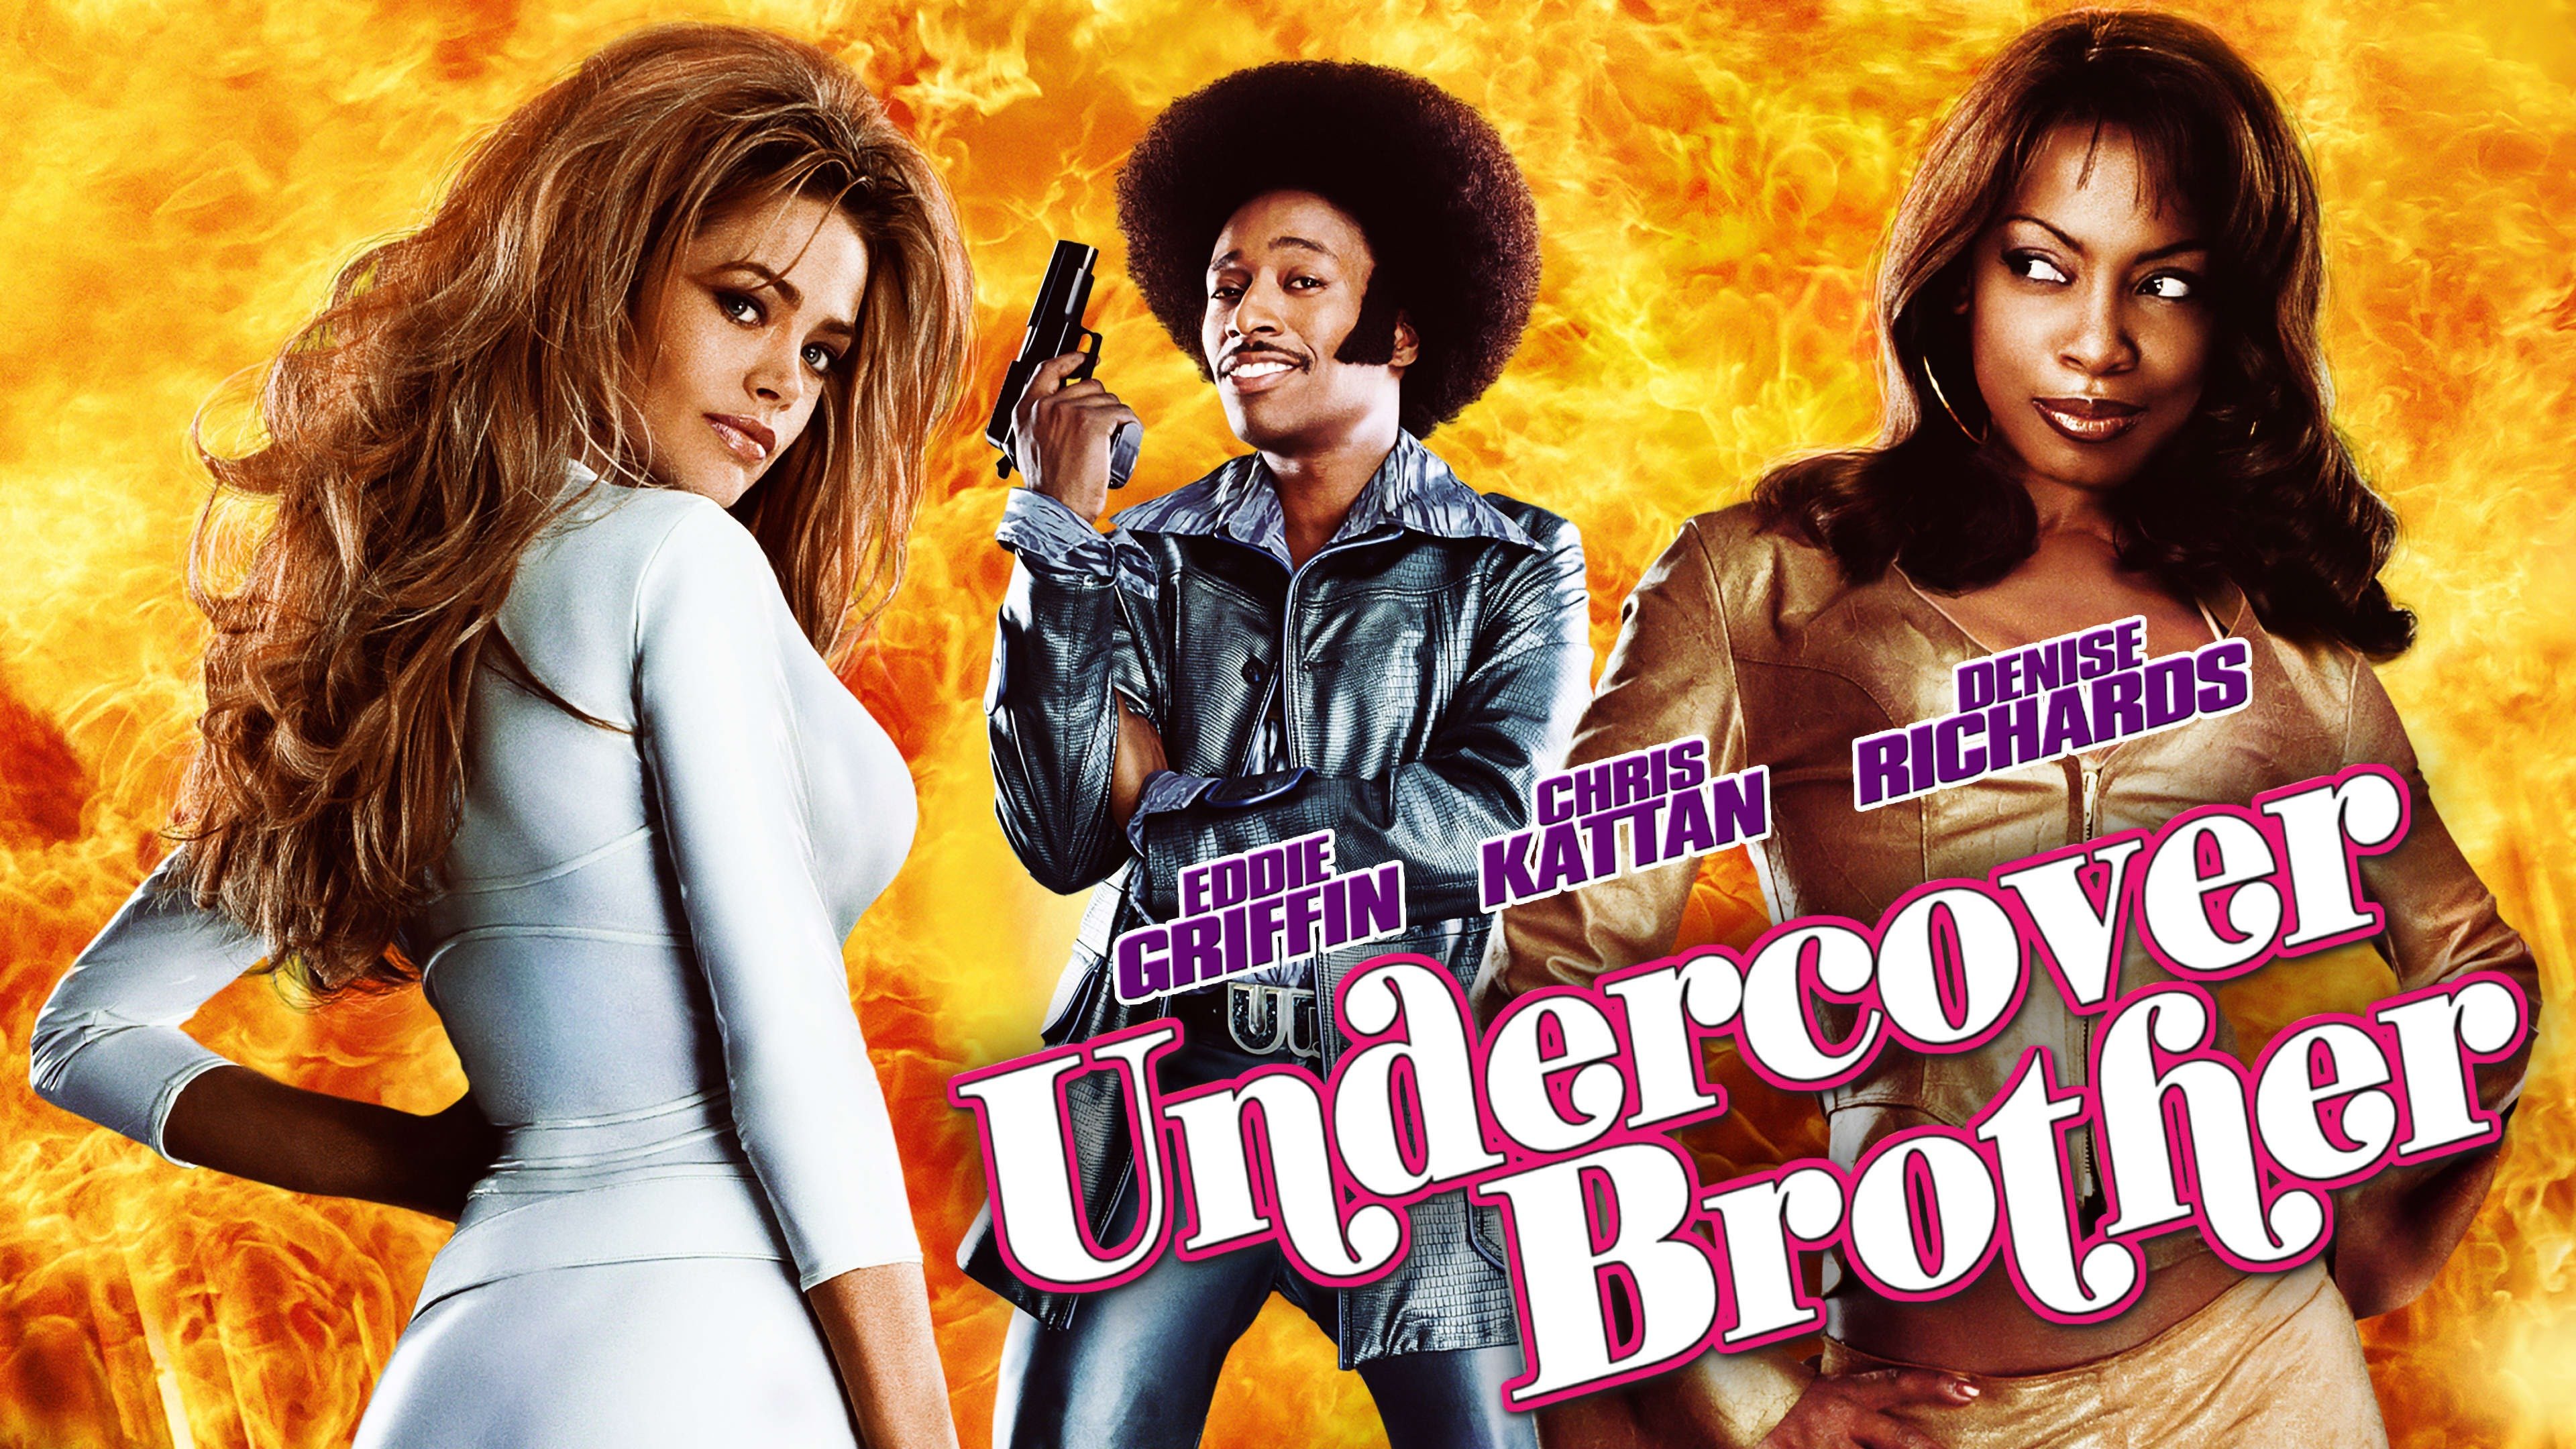 anne thompson recommends undercover brother full movie pic